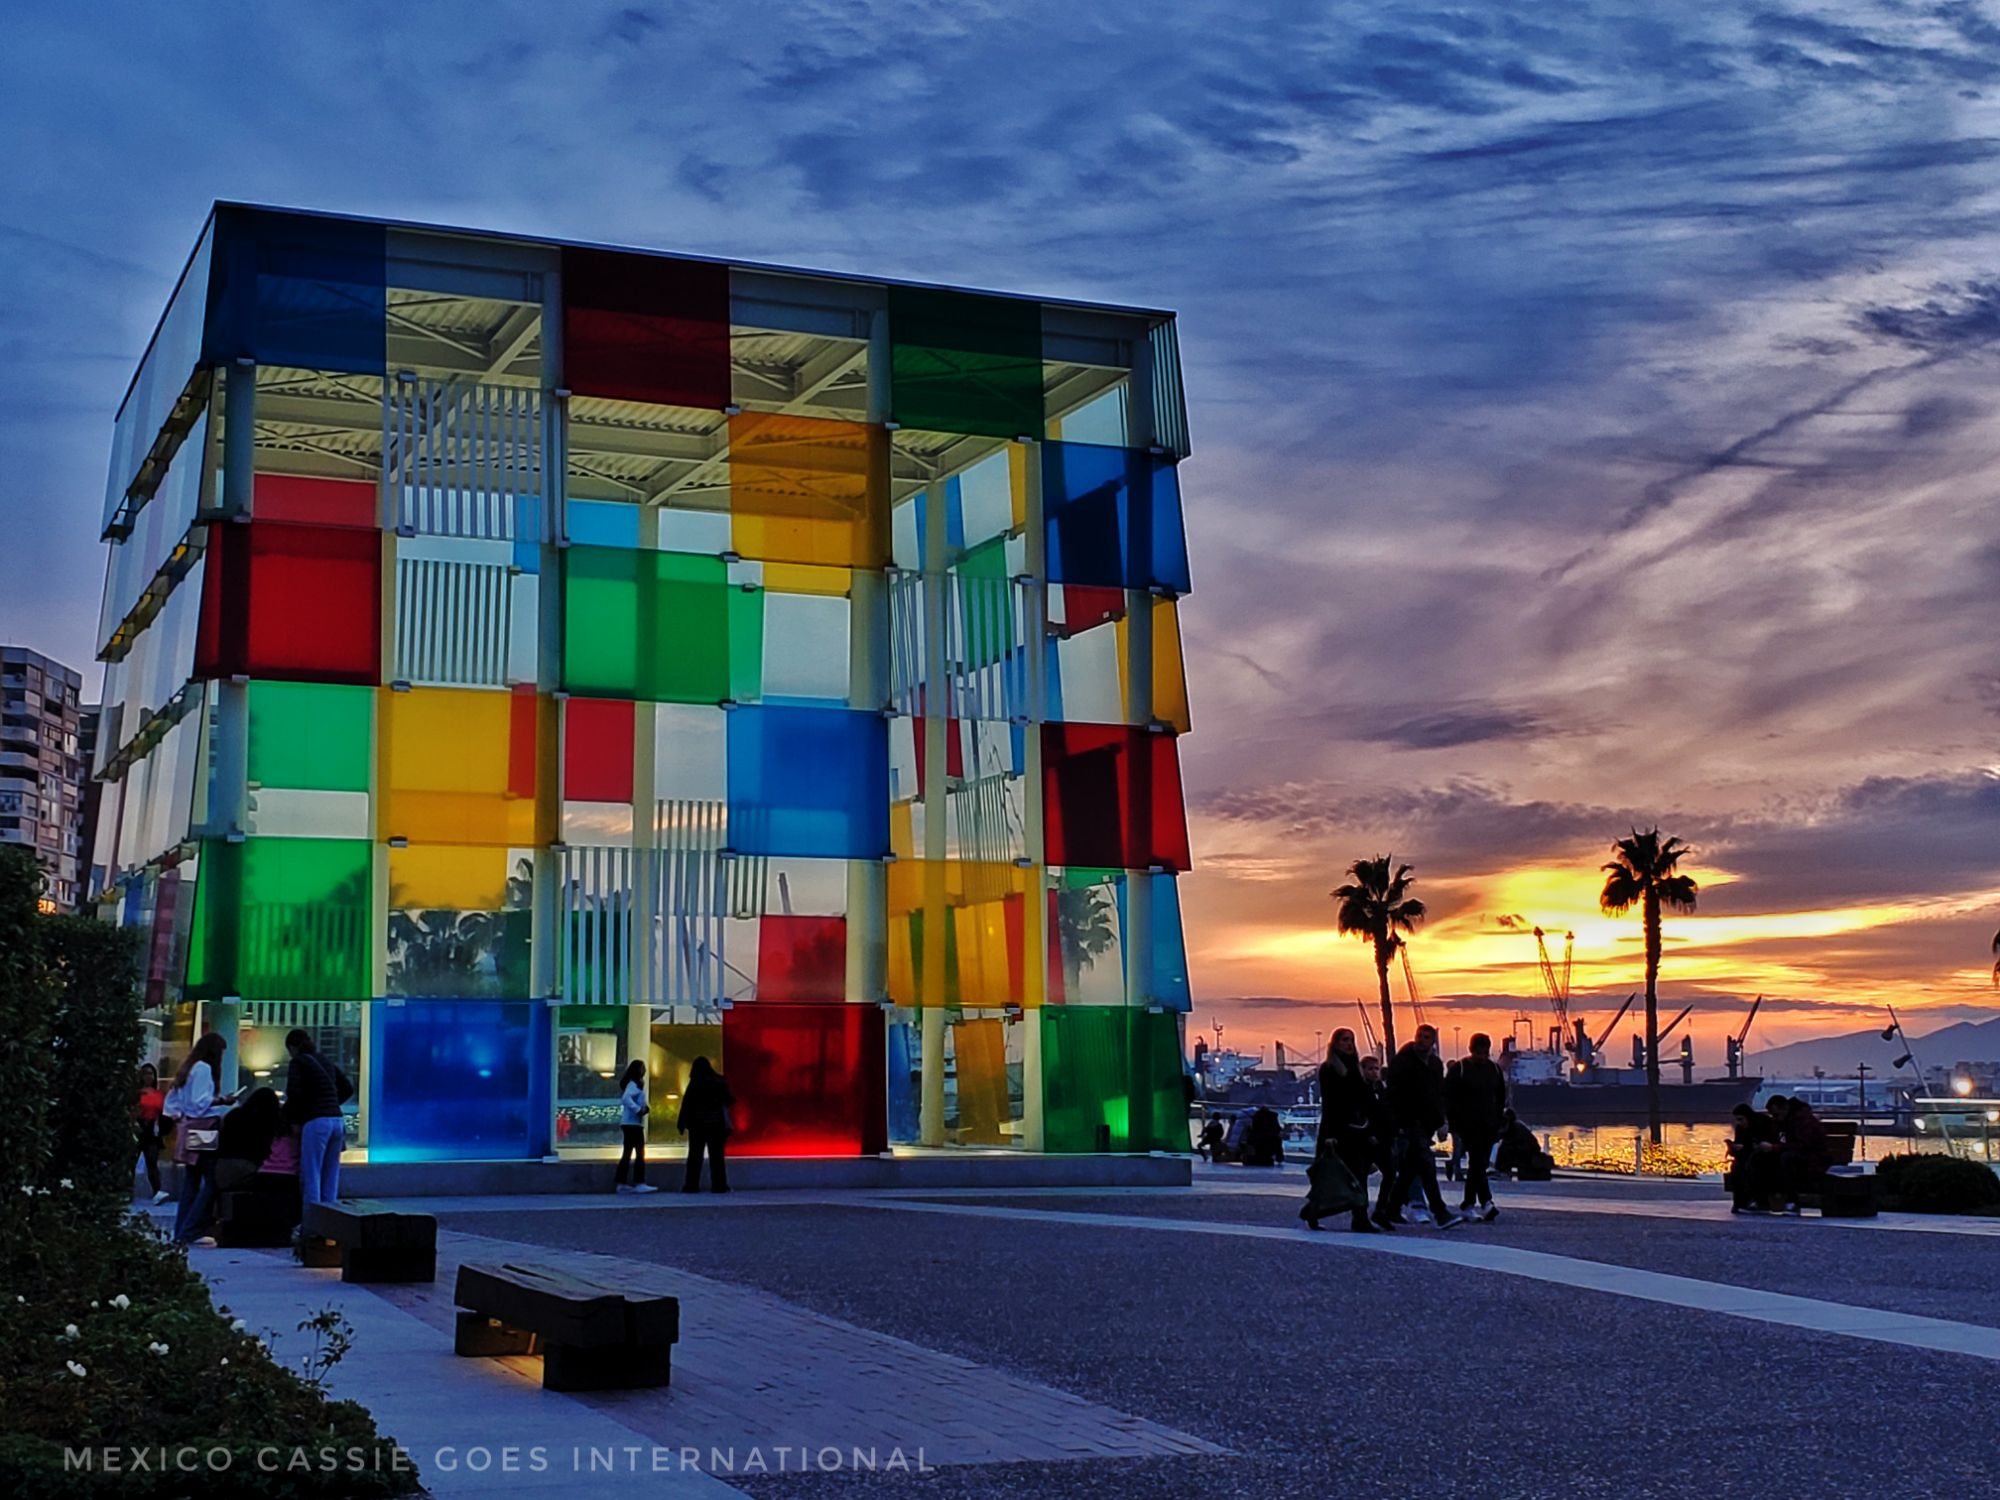 Pompidou box in Malaga - cleear, red, yellow, green and blue squares of glass making a large box. Dusk